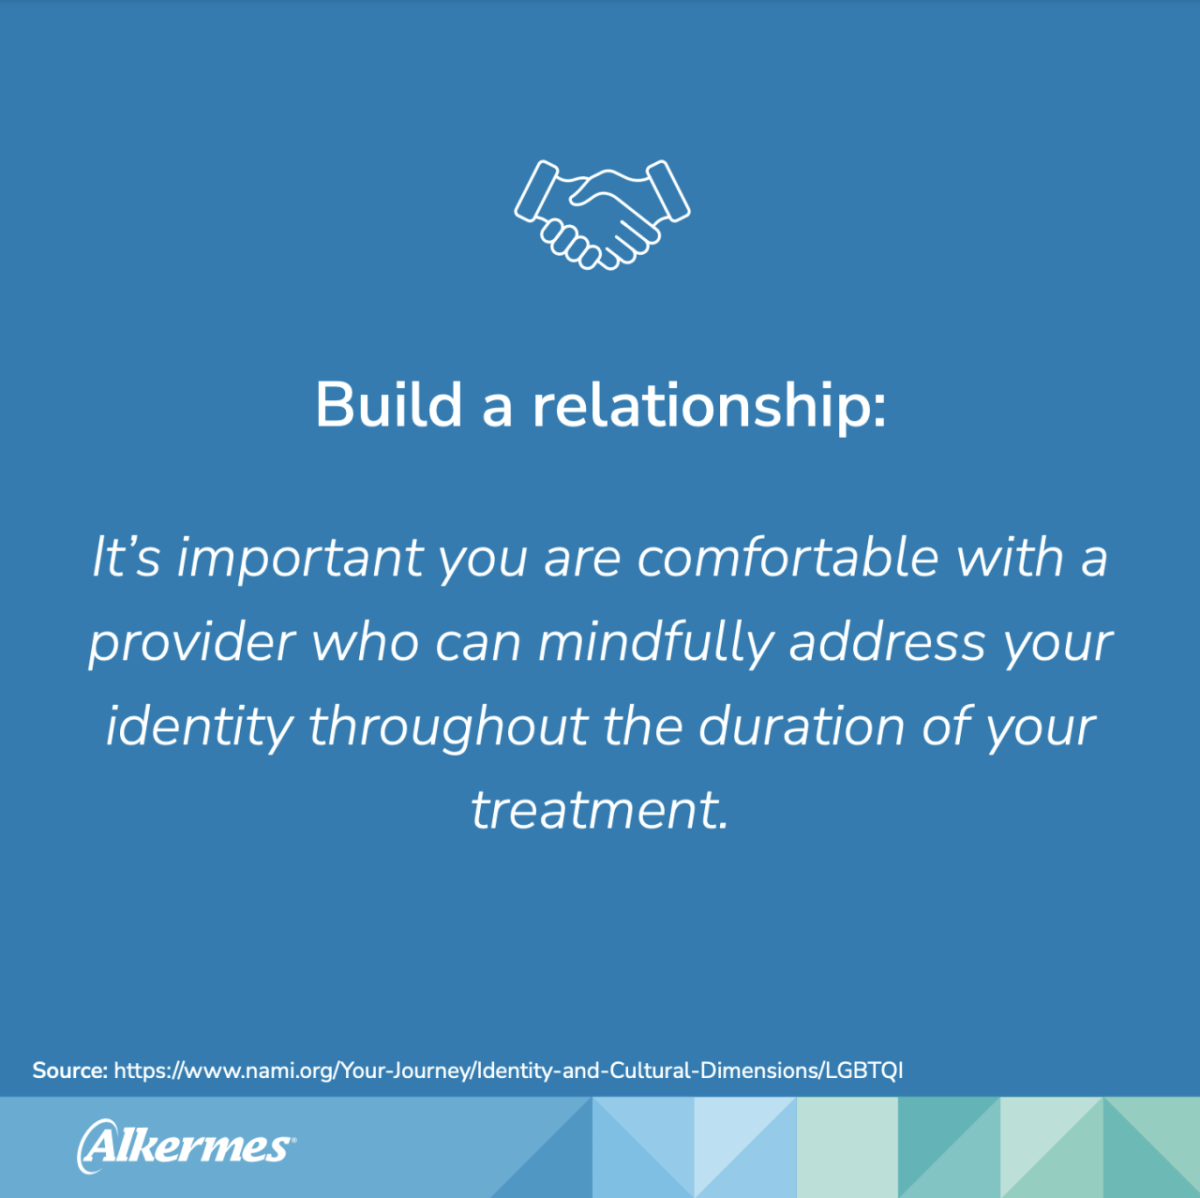 PDF Slide with the text "Build a relationship: It’s important you are comfortable with a provider who can mindfully address your identity throughout the duration of your treatment. Source: https://www.nami.org/Your-Journey/Identity-and-Cultural-Dimensions/LGBTQI"